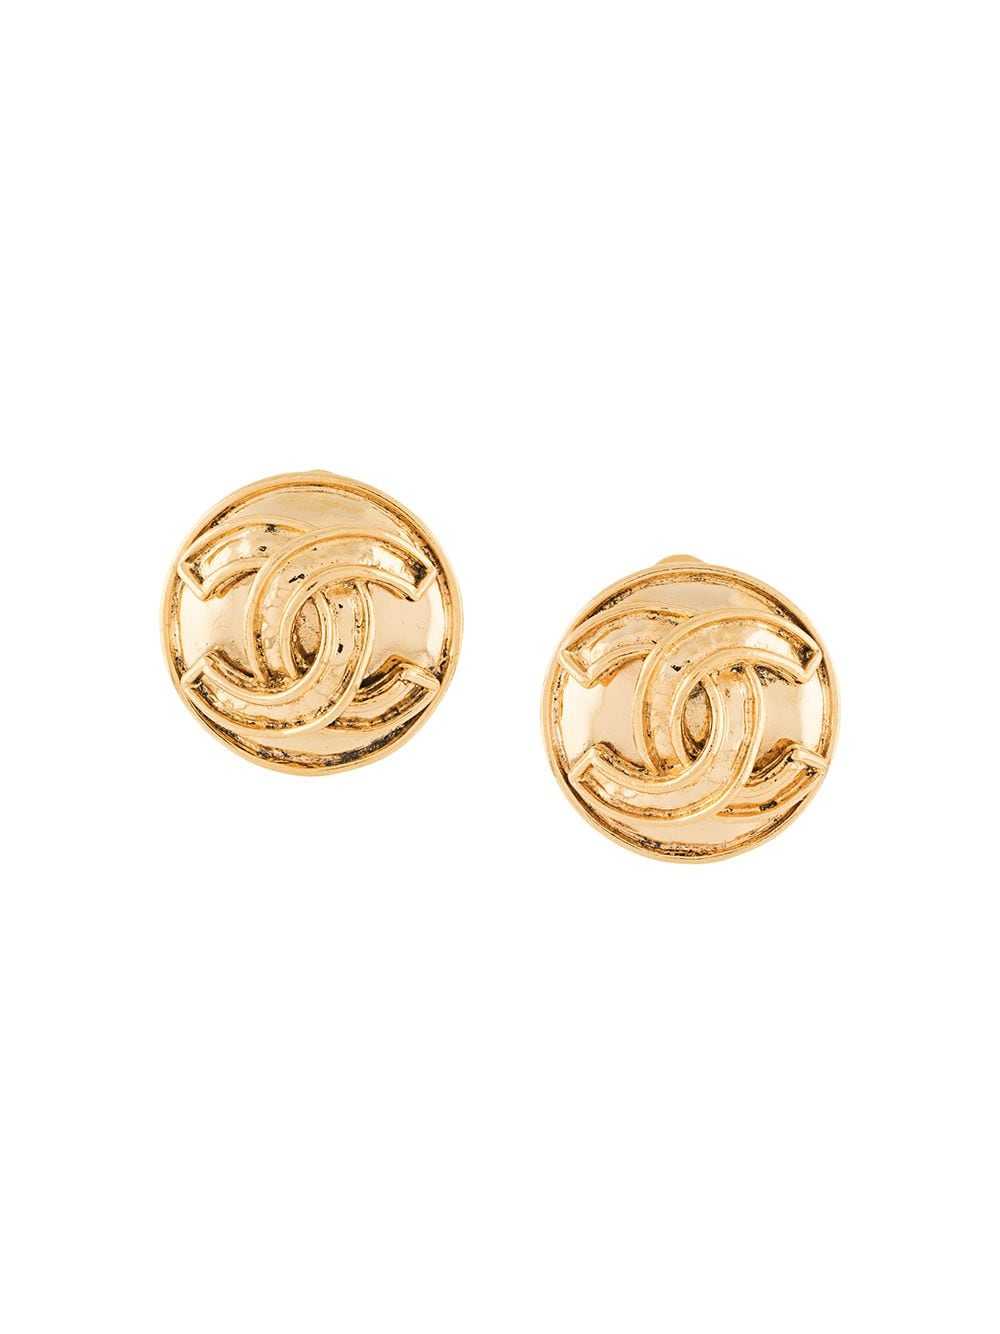 CHANEL Pre-Owned 1994 CC button earrings - Gold - image 1